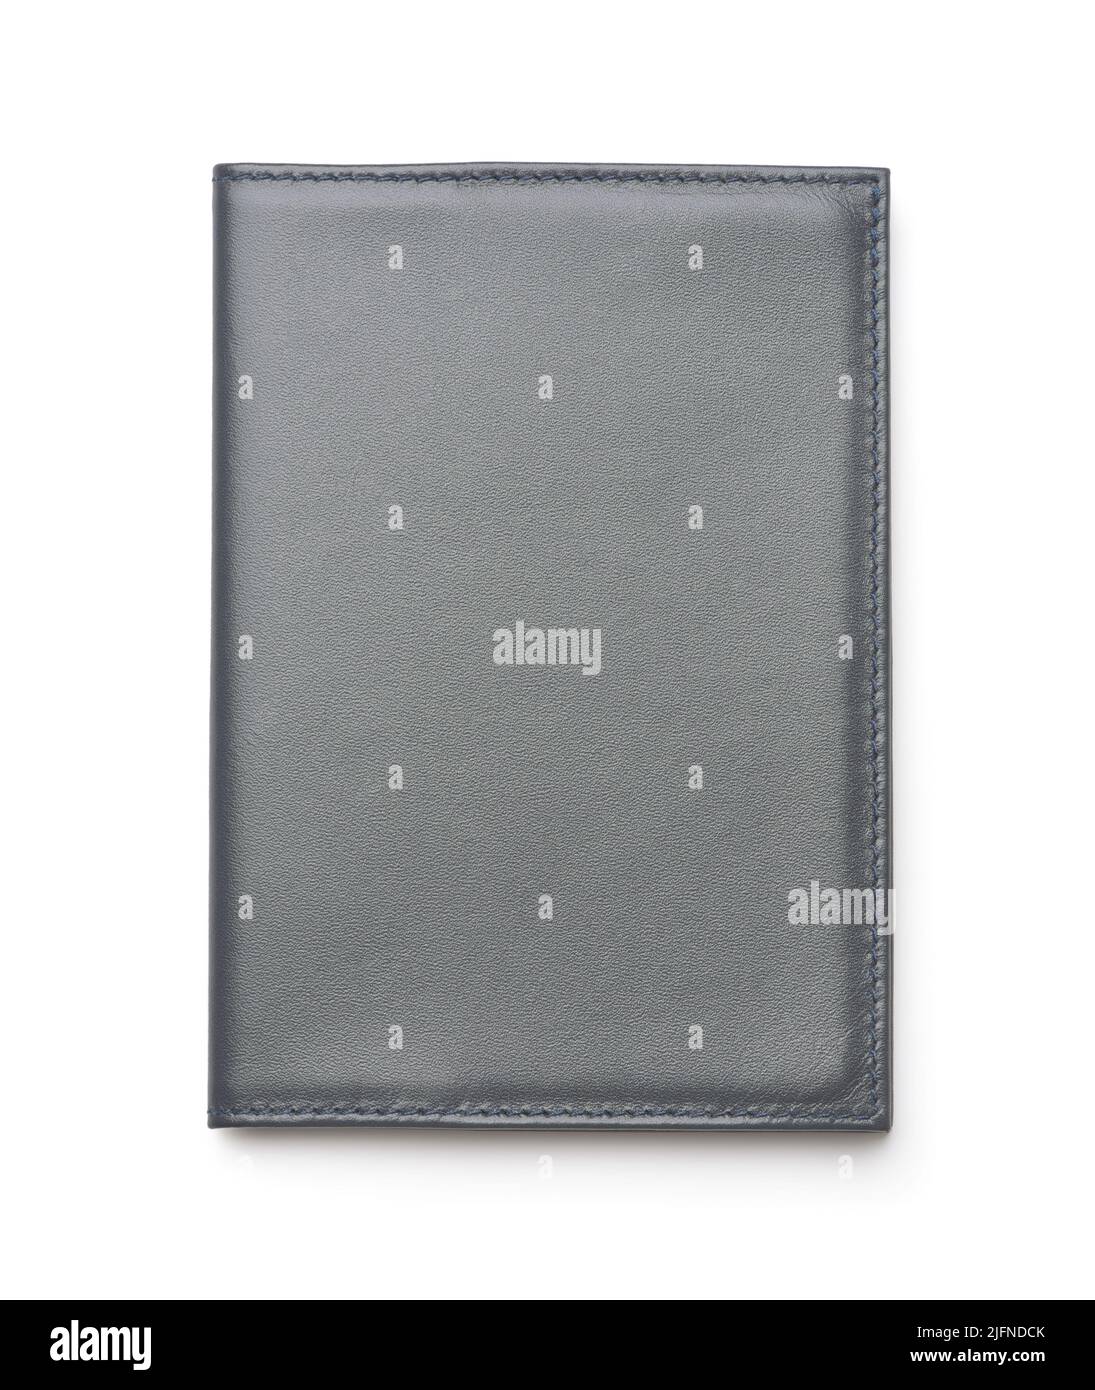 Front view of gray leather id card cover isolated on white Stock Photo